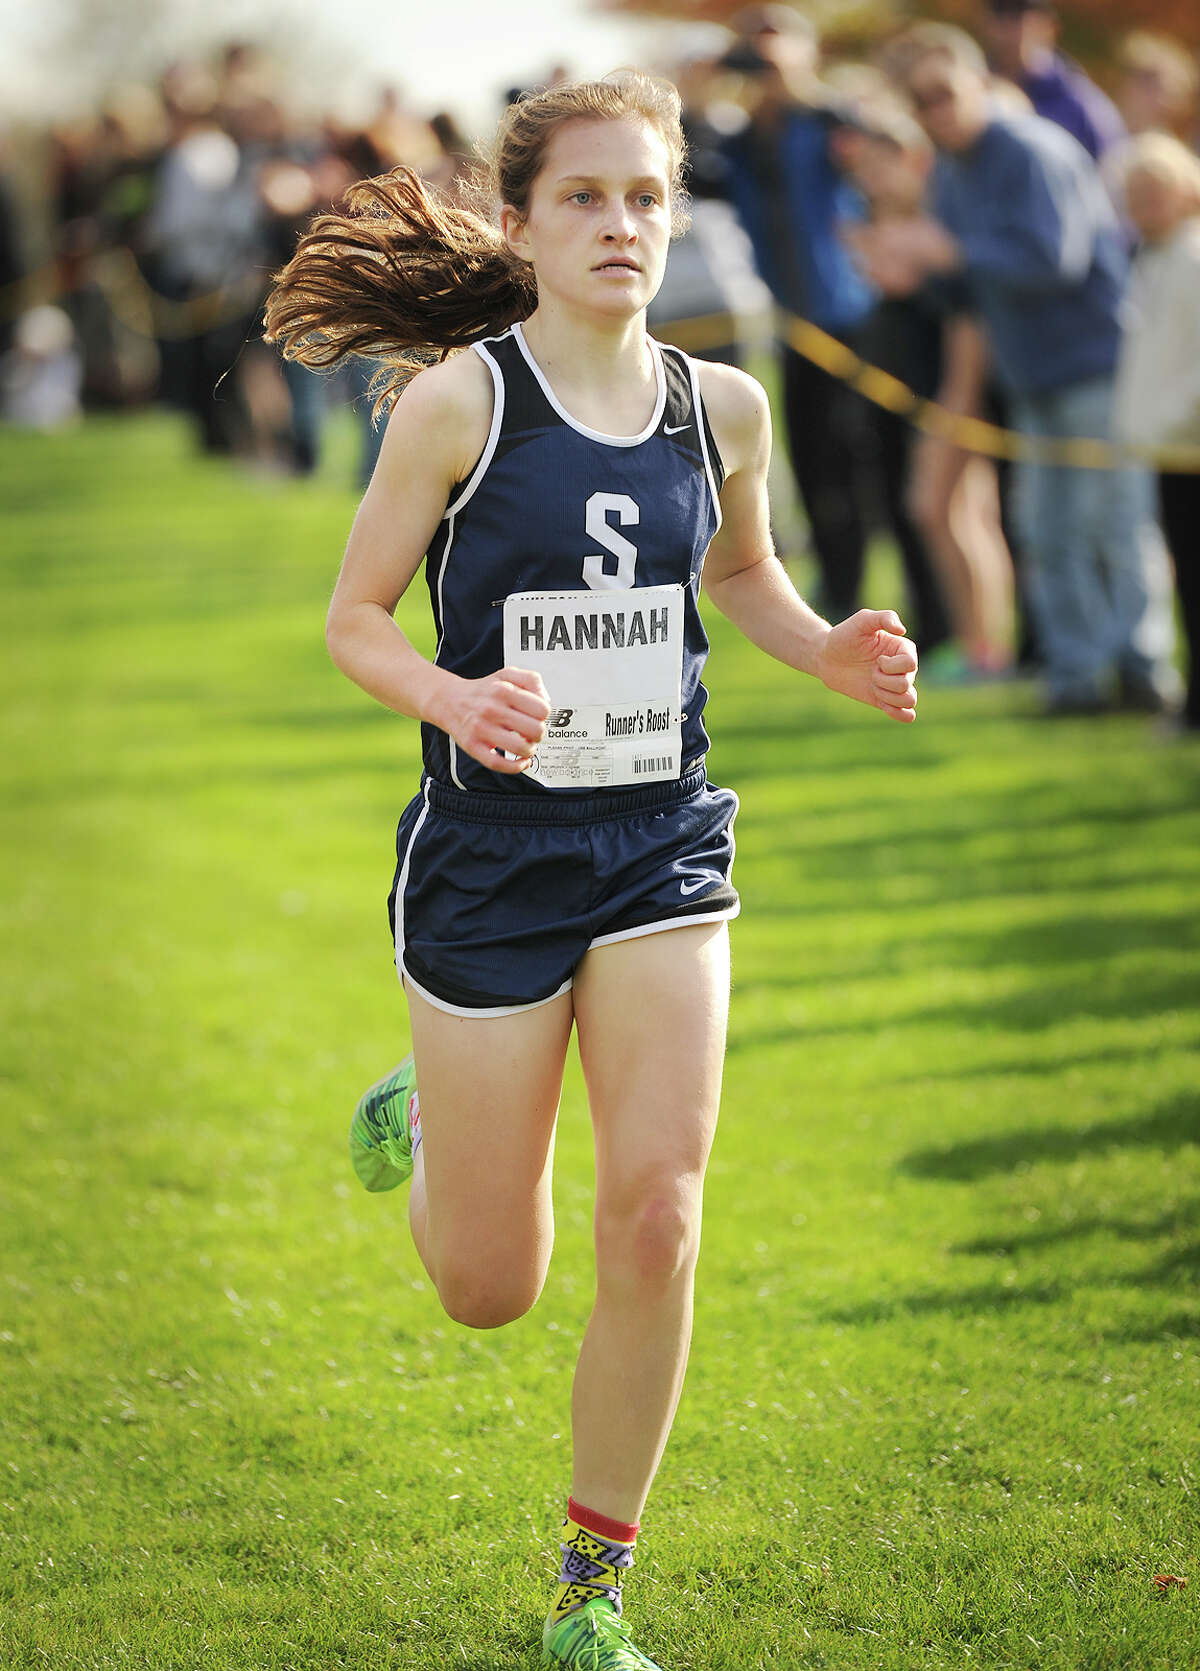 Staples' Hannah DeBalsi races to the finish to win the FCIAC Girls Cross Country Championships at Waveny Park in New Canaan, Conn. on Monday, October 20, 2014.